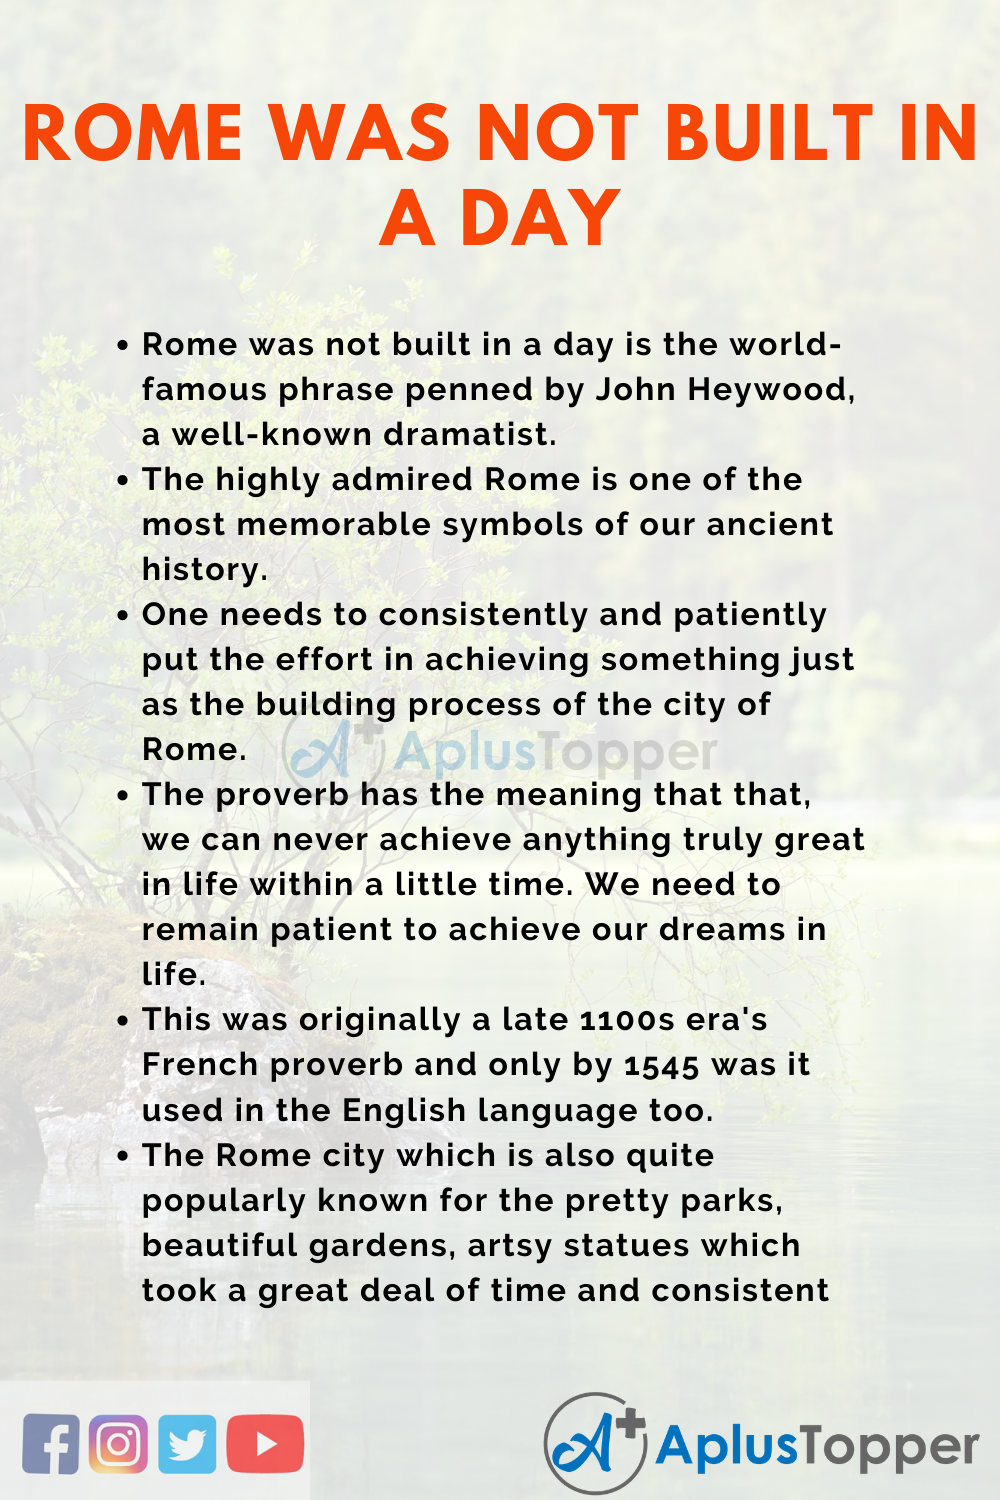 Essay on Rome Was Not Built in a Day